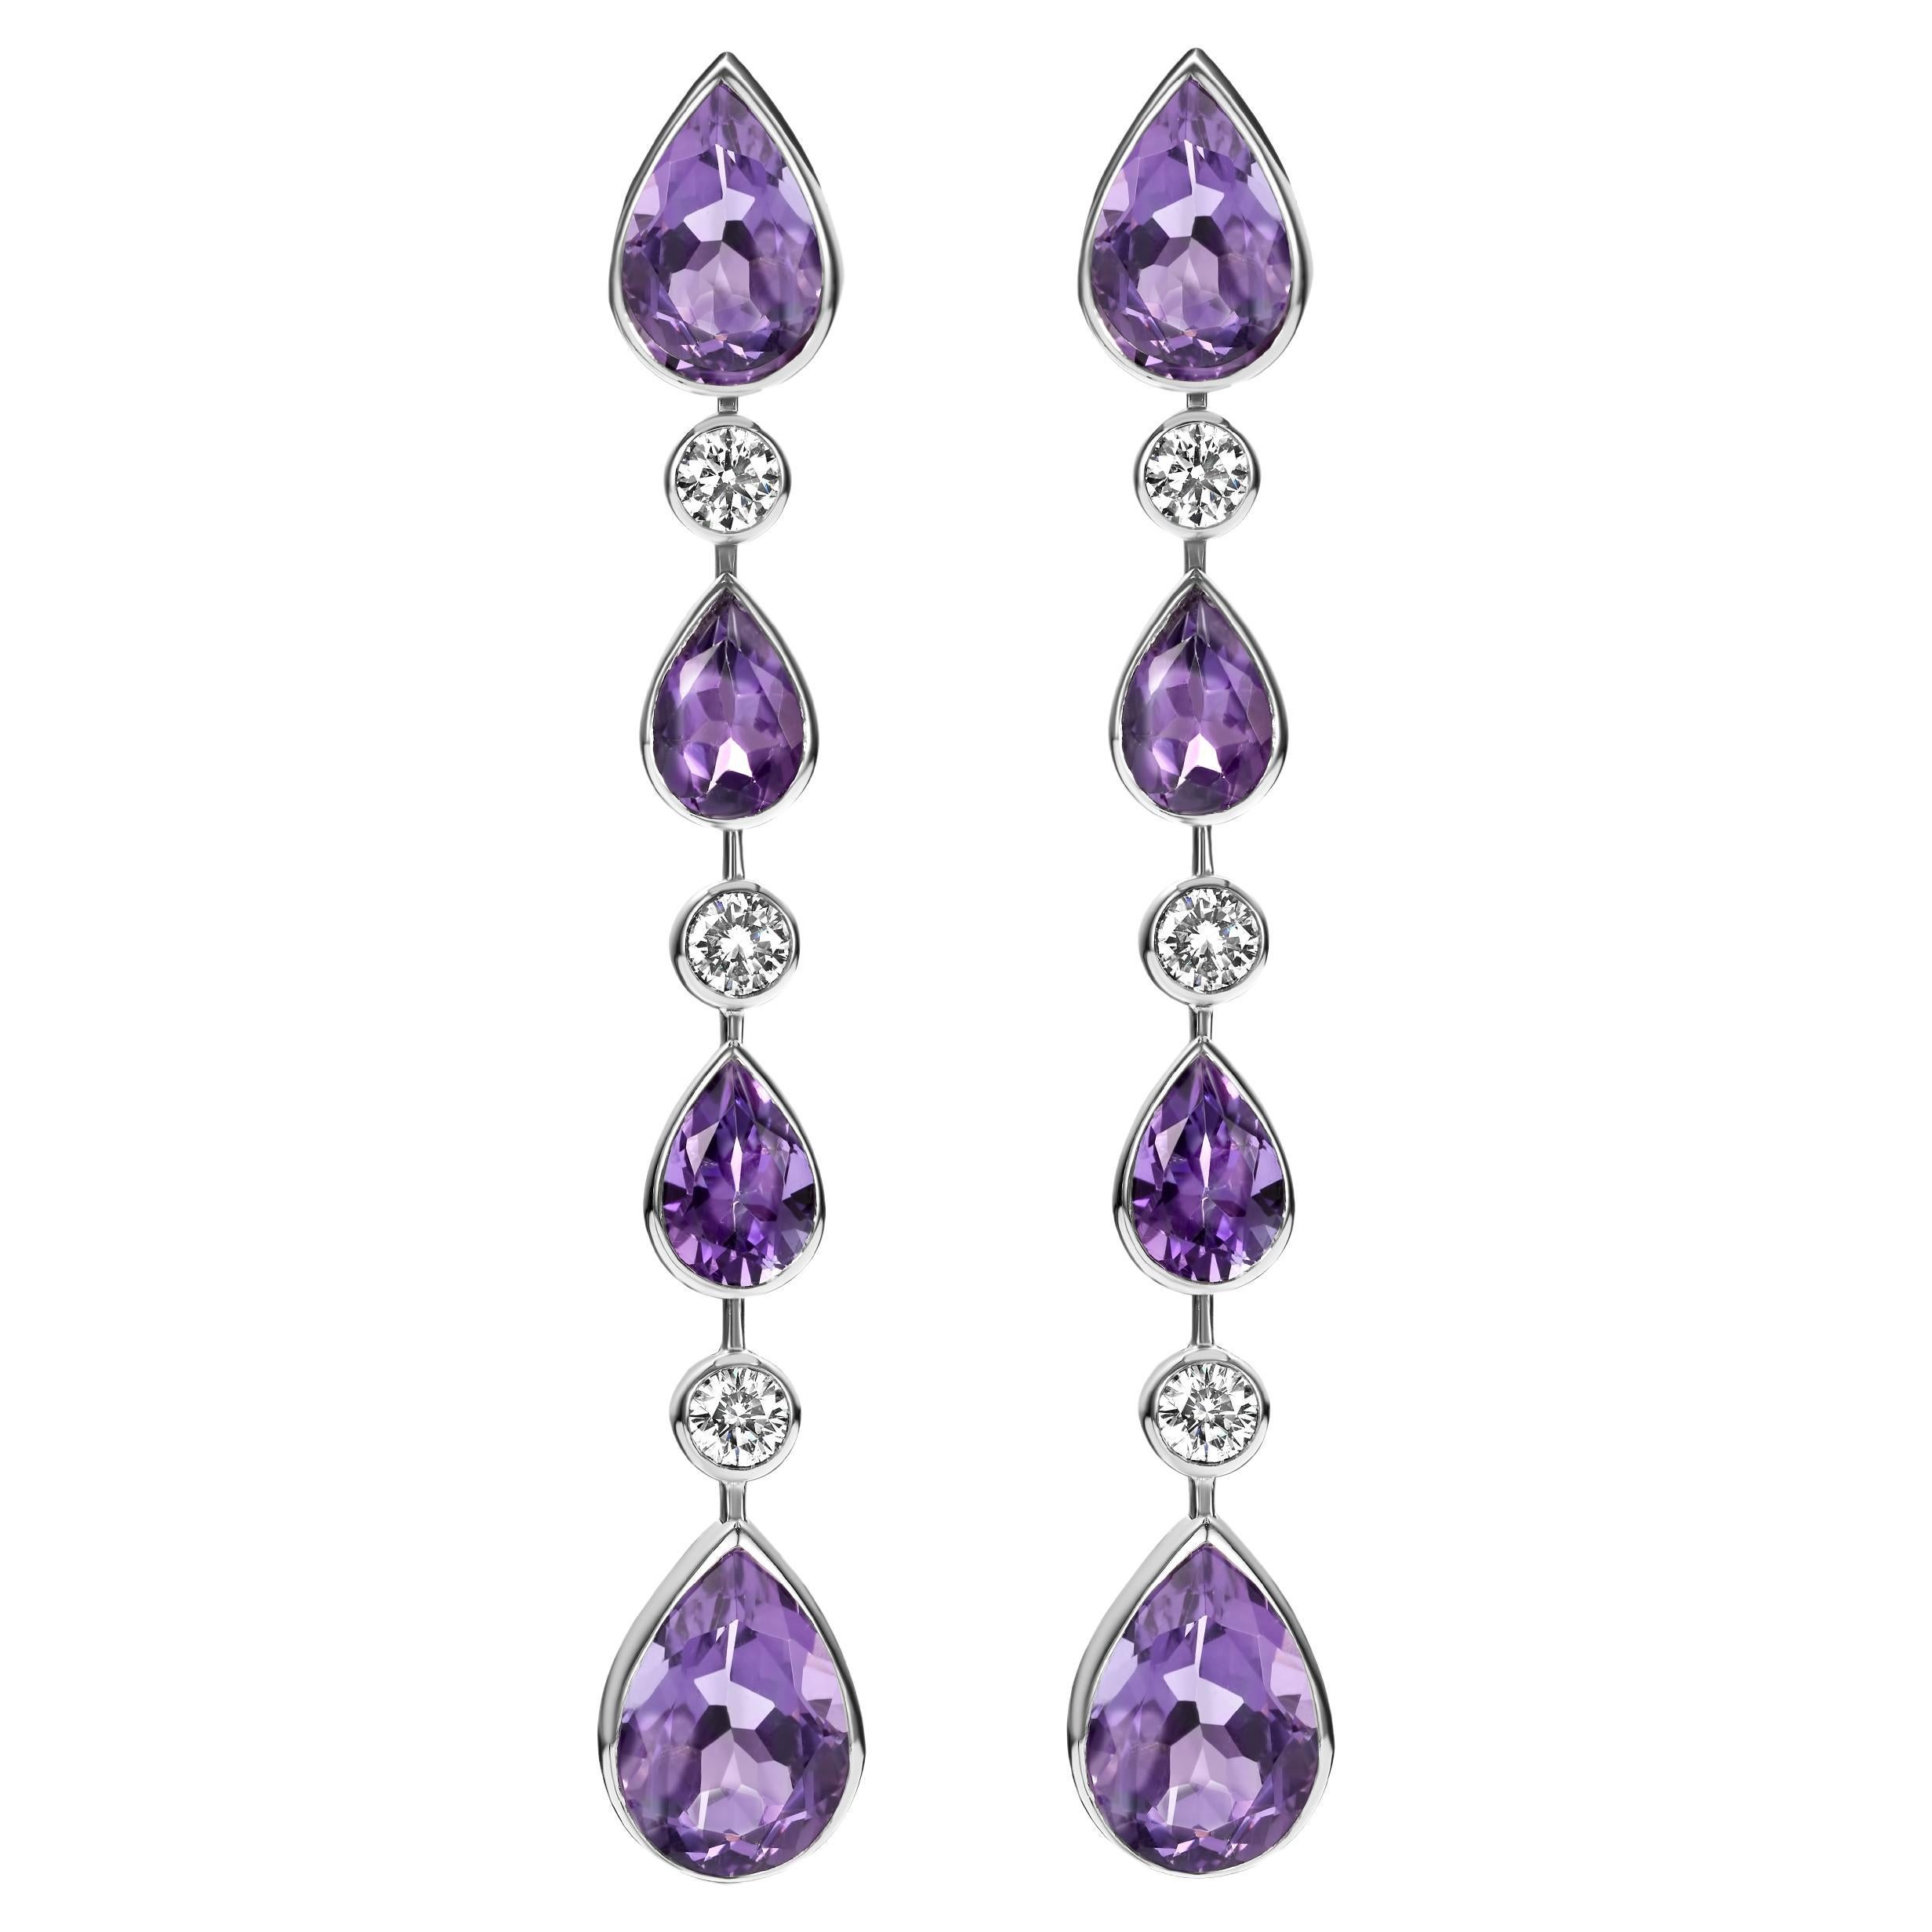 18 Kt White Gold Earrings with 18.43ct Amethyst & 1.55ct Brilliant Cut Diamonds